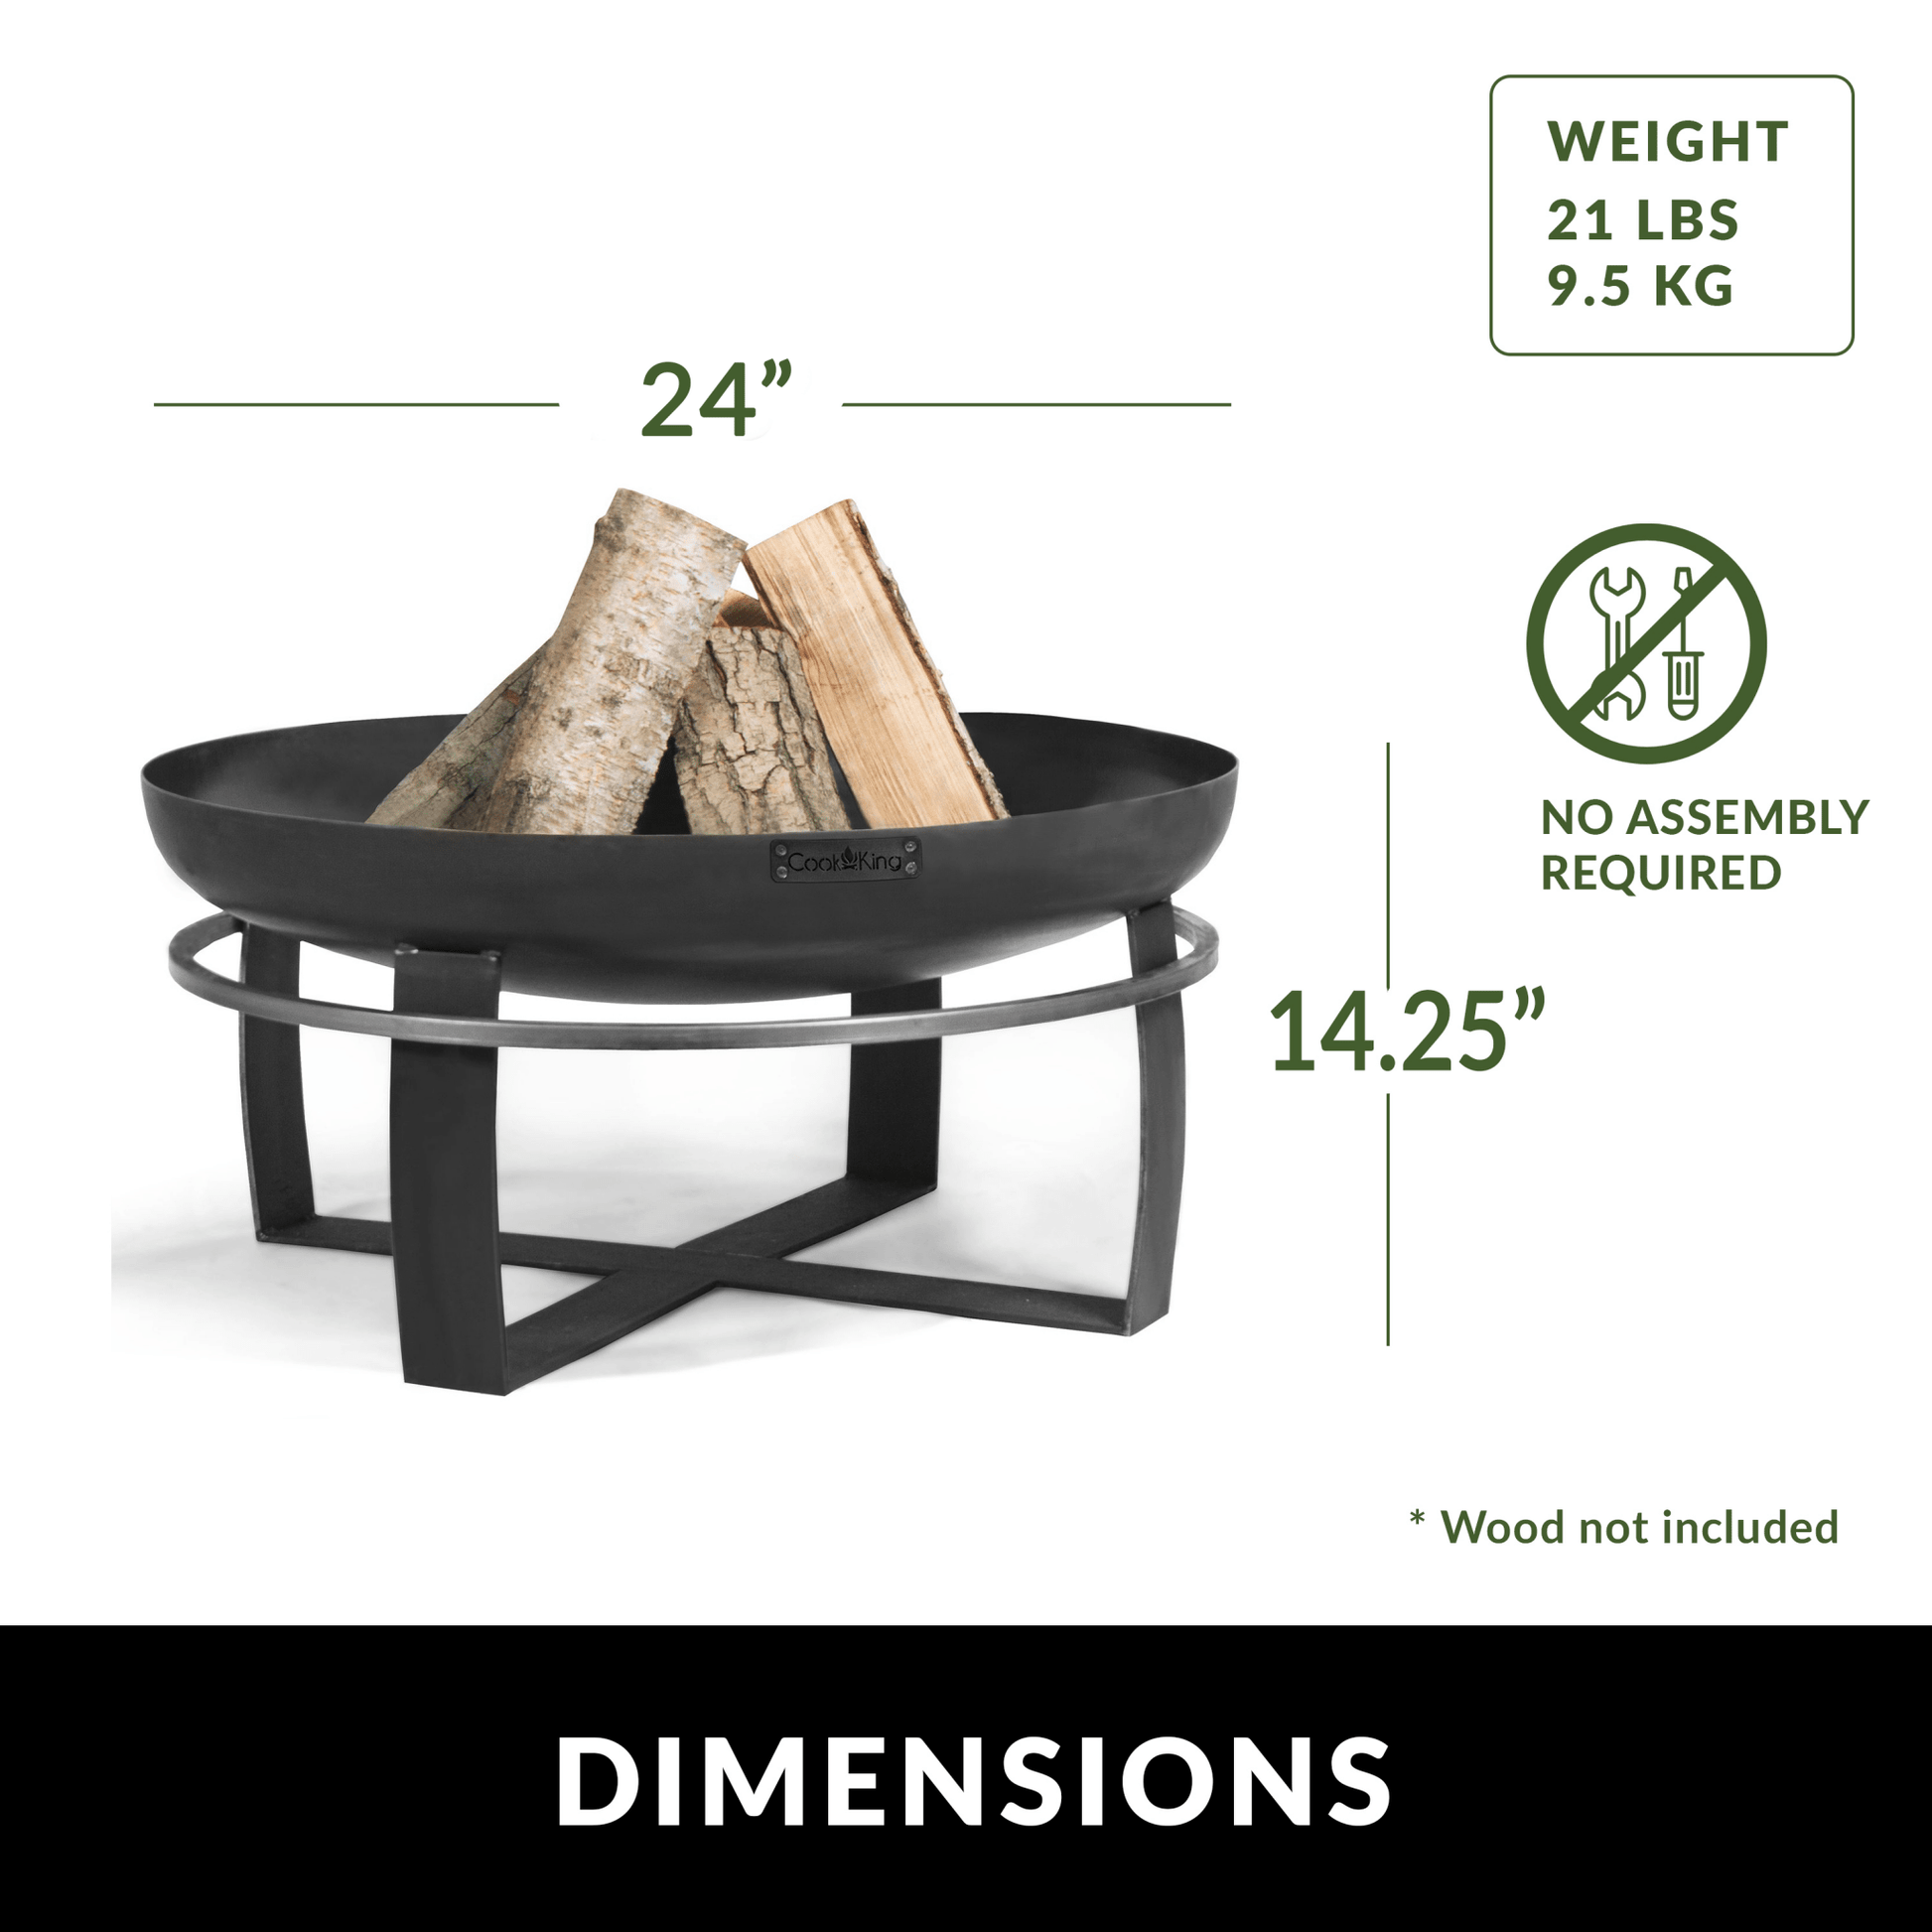 Viking 24" Fire Pit with Cover Lid - Good Directions